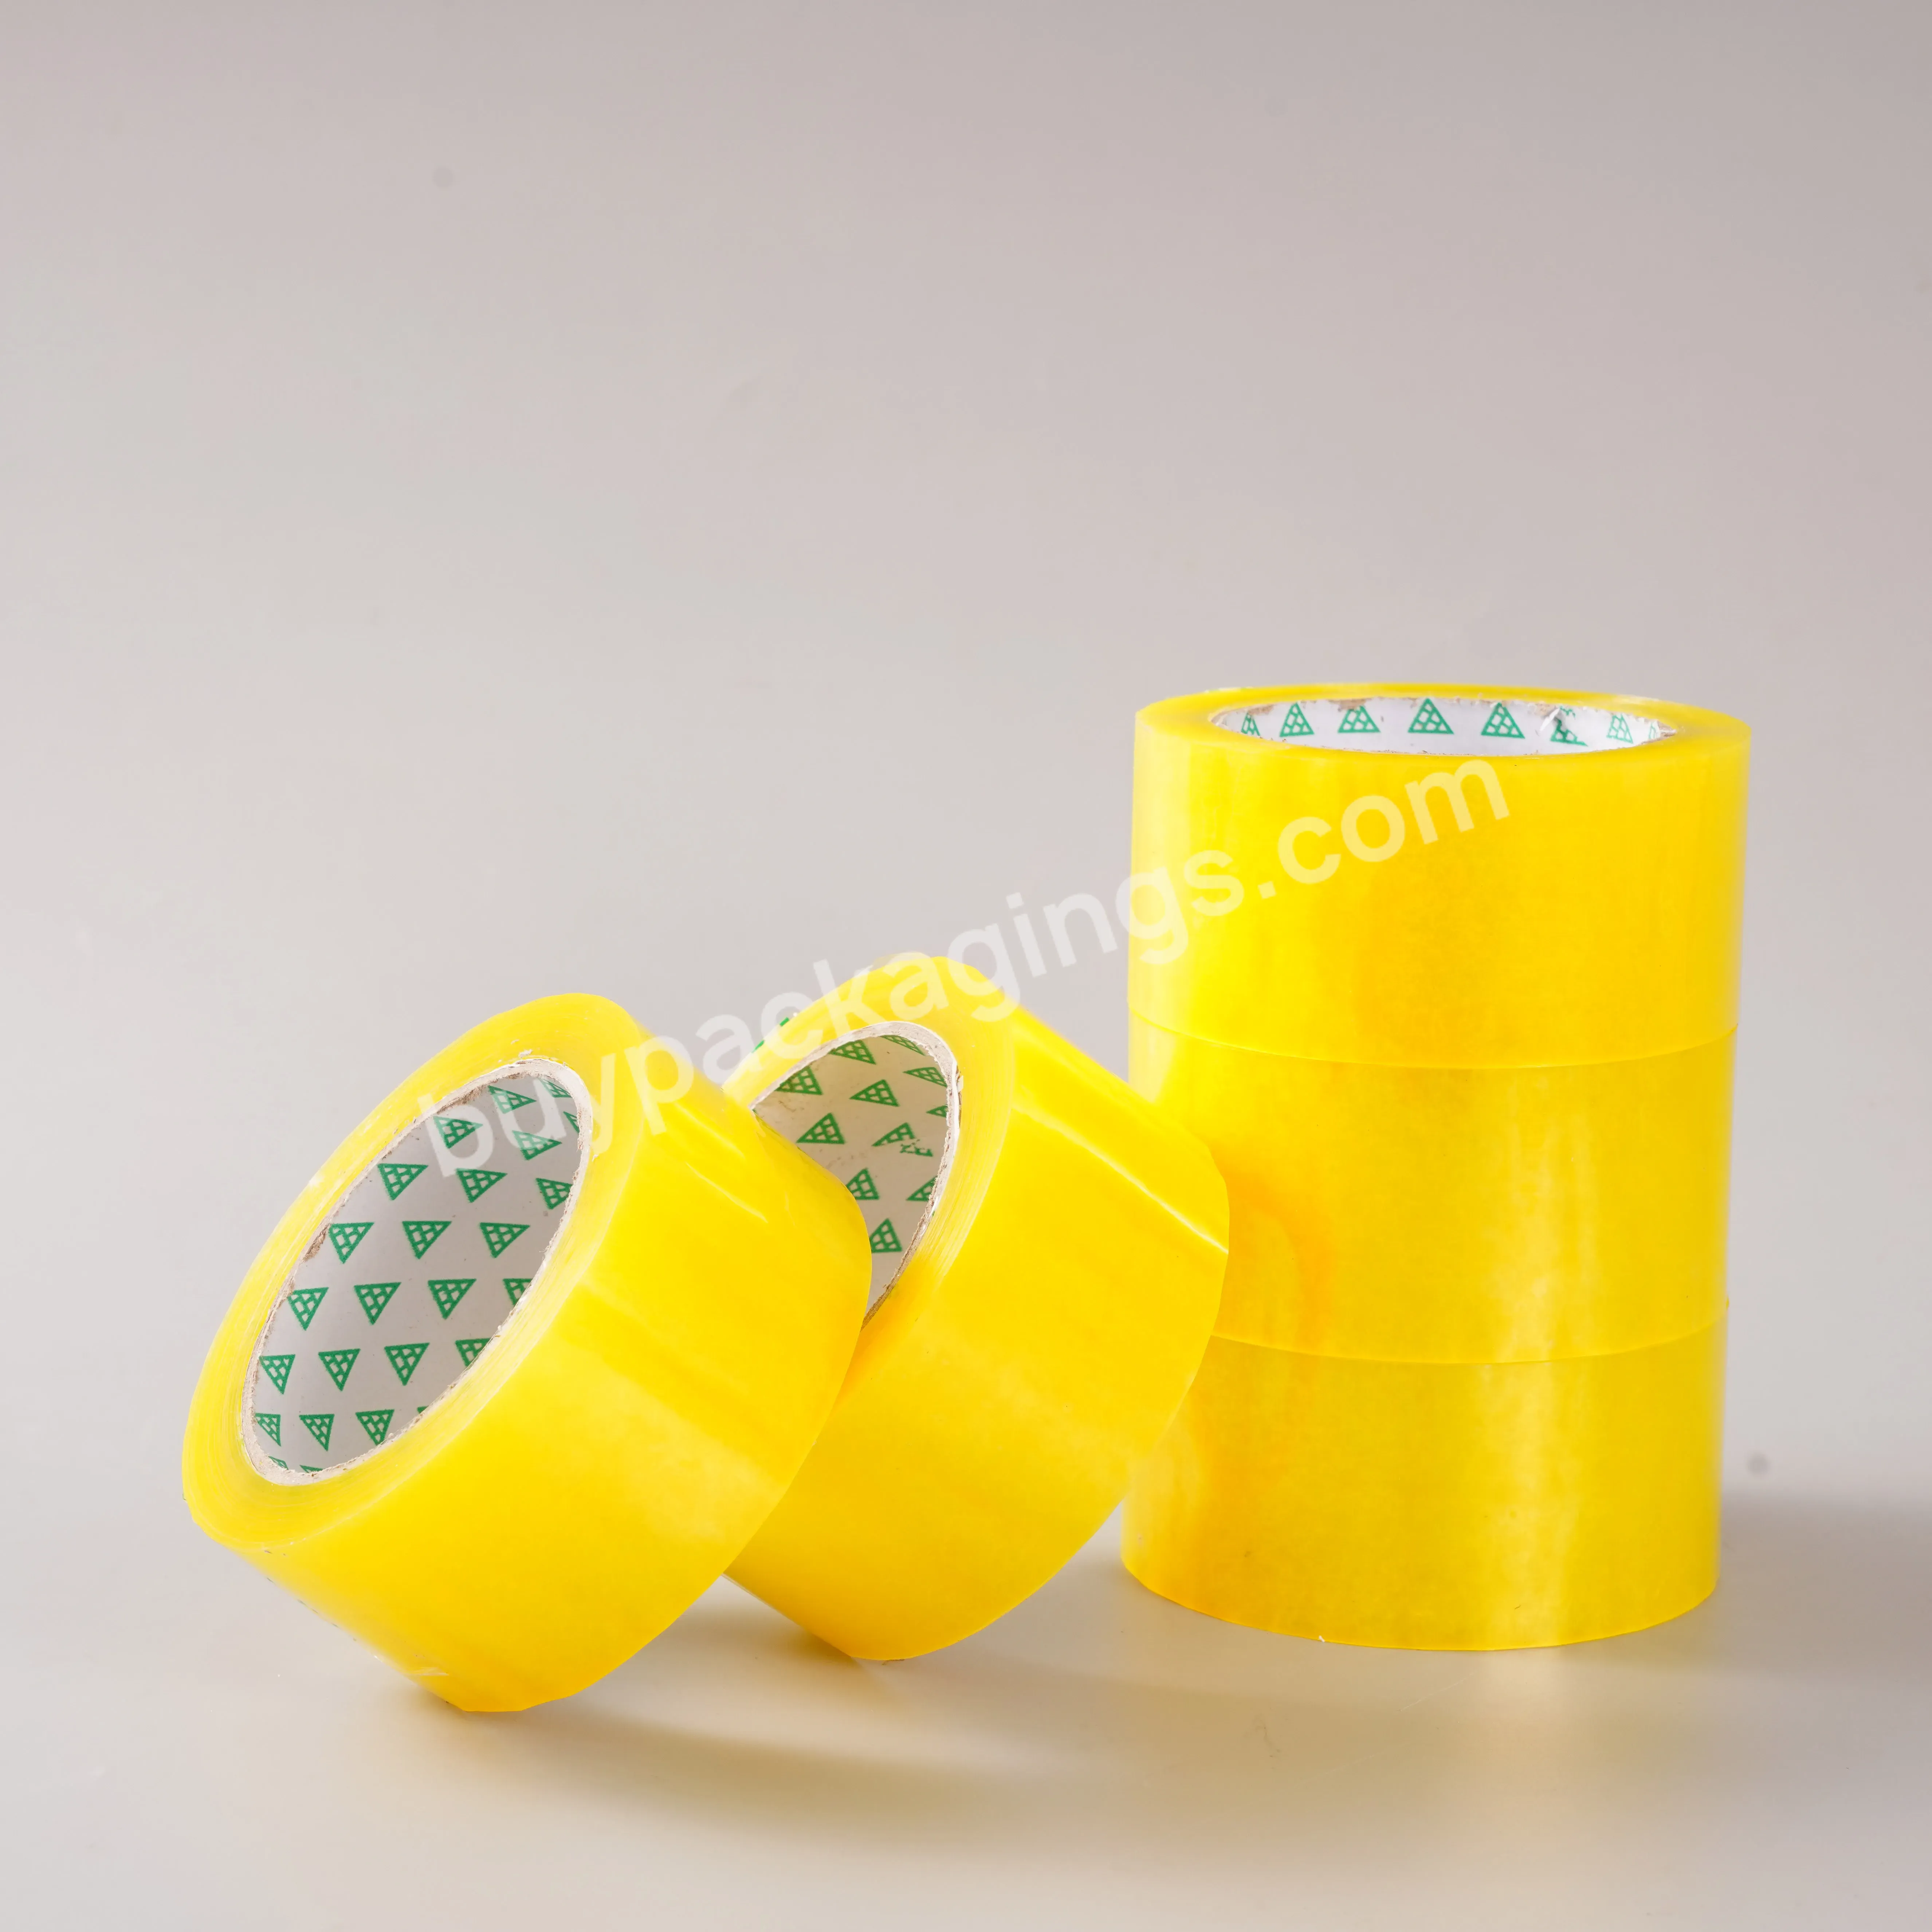 Reliable Supplier Transparent Bopp Packing Tape For Parcel Carton Shipping - Buy Reliable Supplier Bopp Packing Tape,Parcel Carton Shipping,Transparent Bopp Tapes.